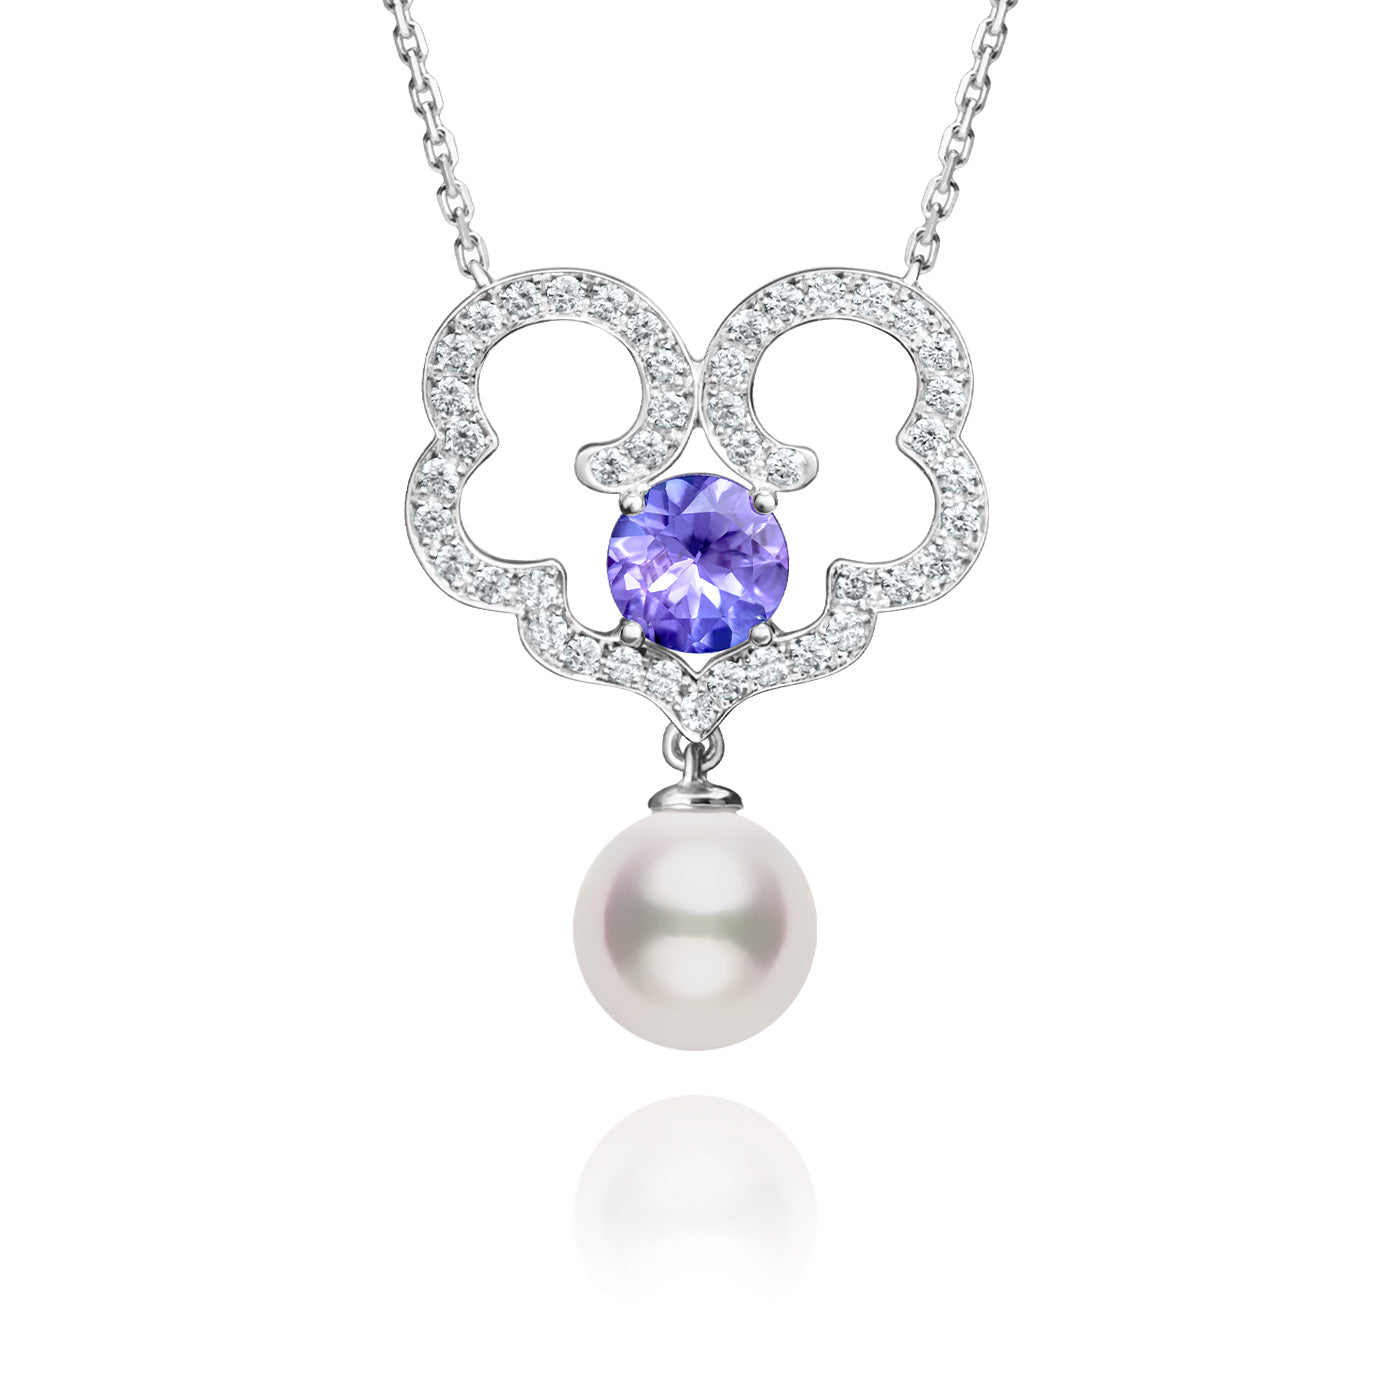 The Timeless Blessings Necklace 18kt White Gold with Tanzanite and Diamond Image 1 | Shen Yun Shop 